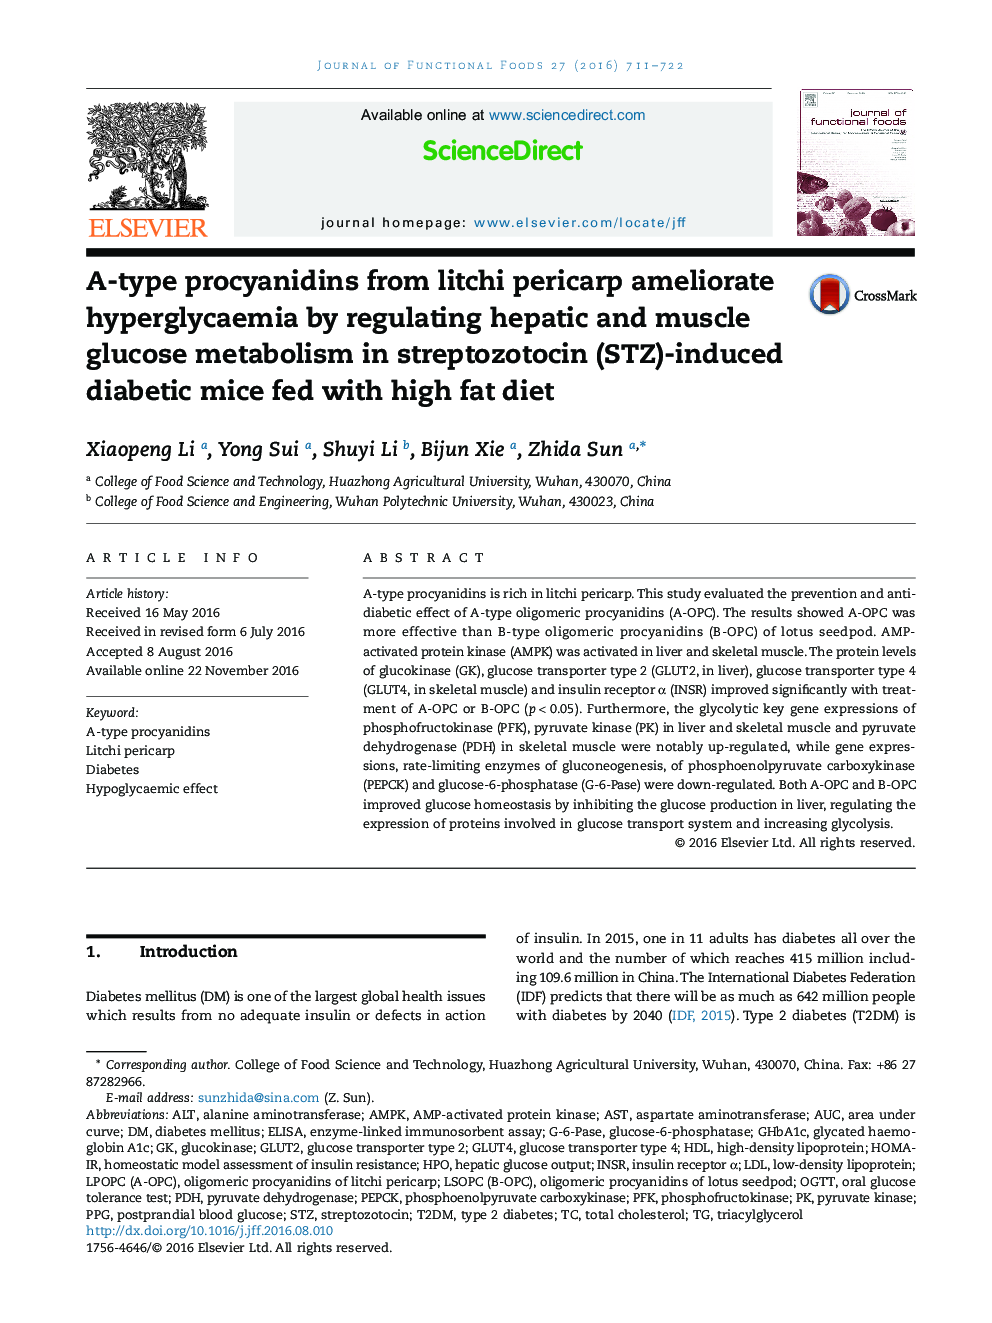 A-type procyanidins from litchi pericarp ameliorate hyperglycaemia by regulating hepatic and muscle glucose metabolism in streptozotocin (STZ)-induced diabetic mice fed with high fat diet